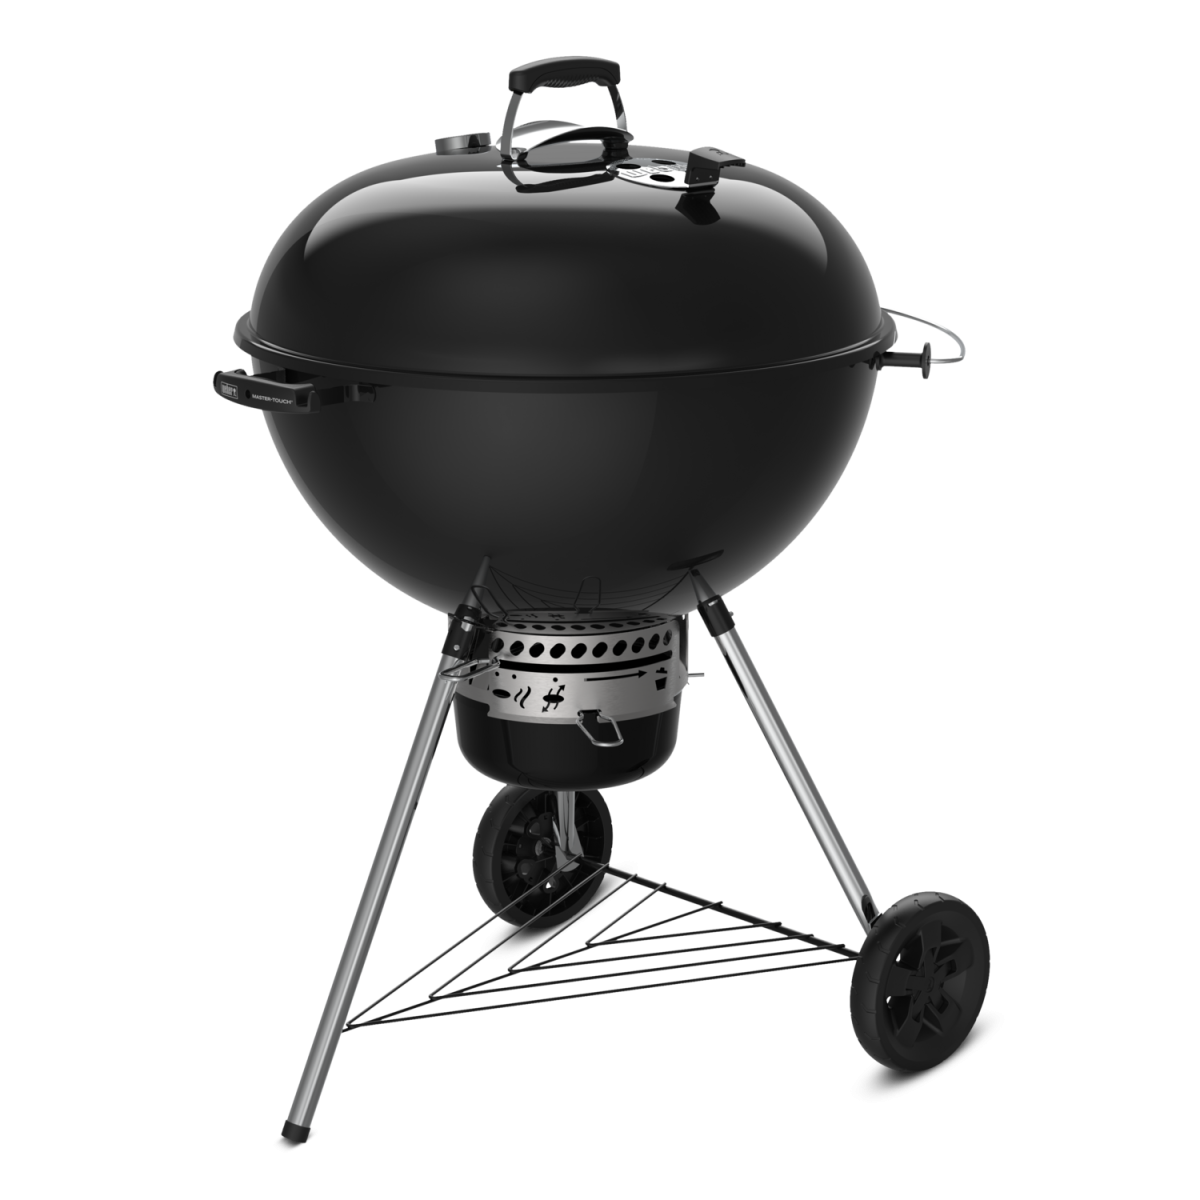 WEBER MASTER-TOUCH E-6755 charcoal grill 67cm, crafted, blk 1500230